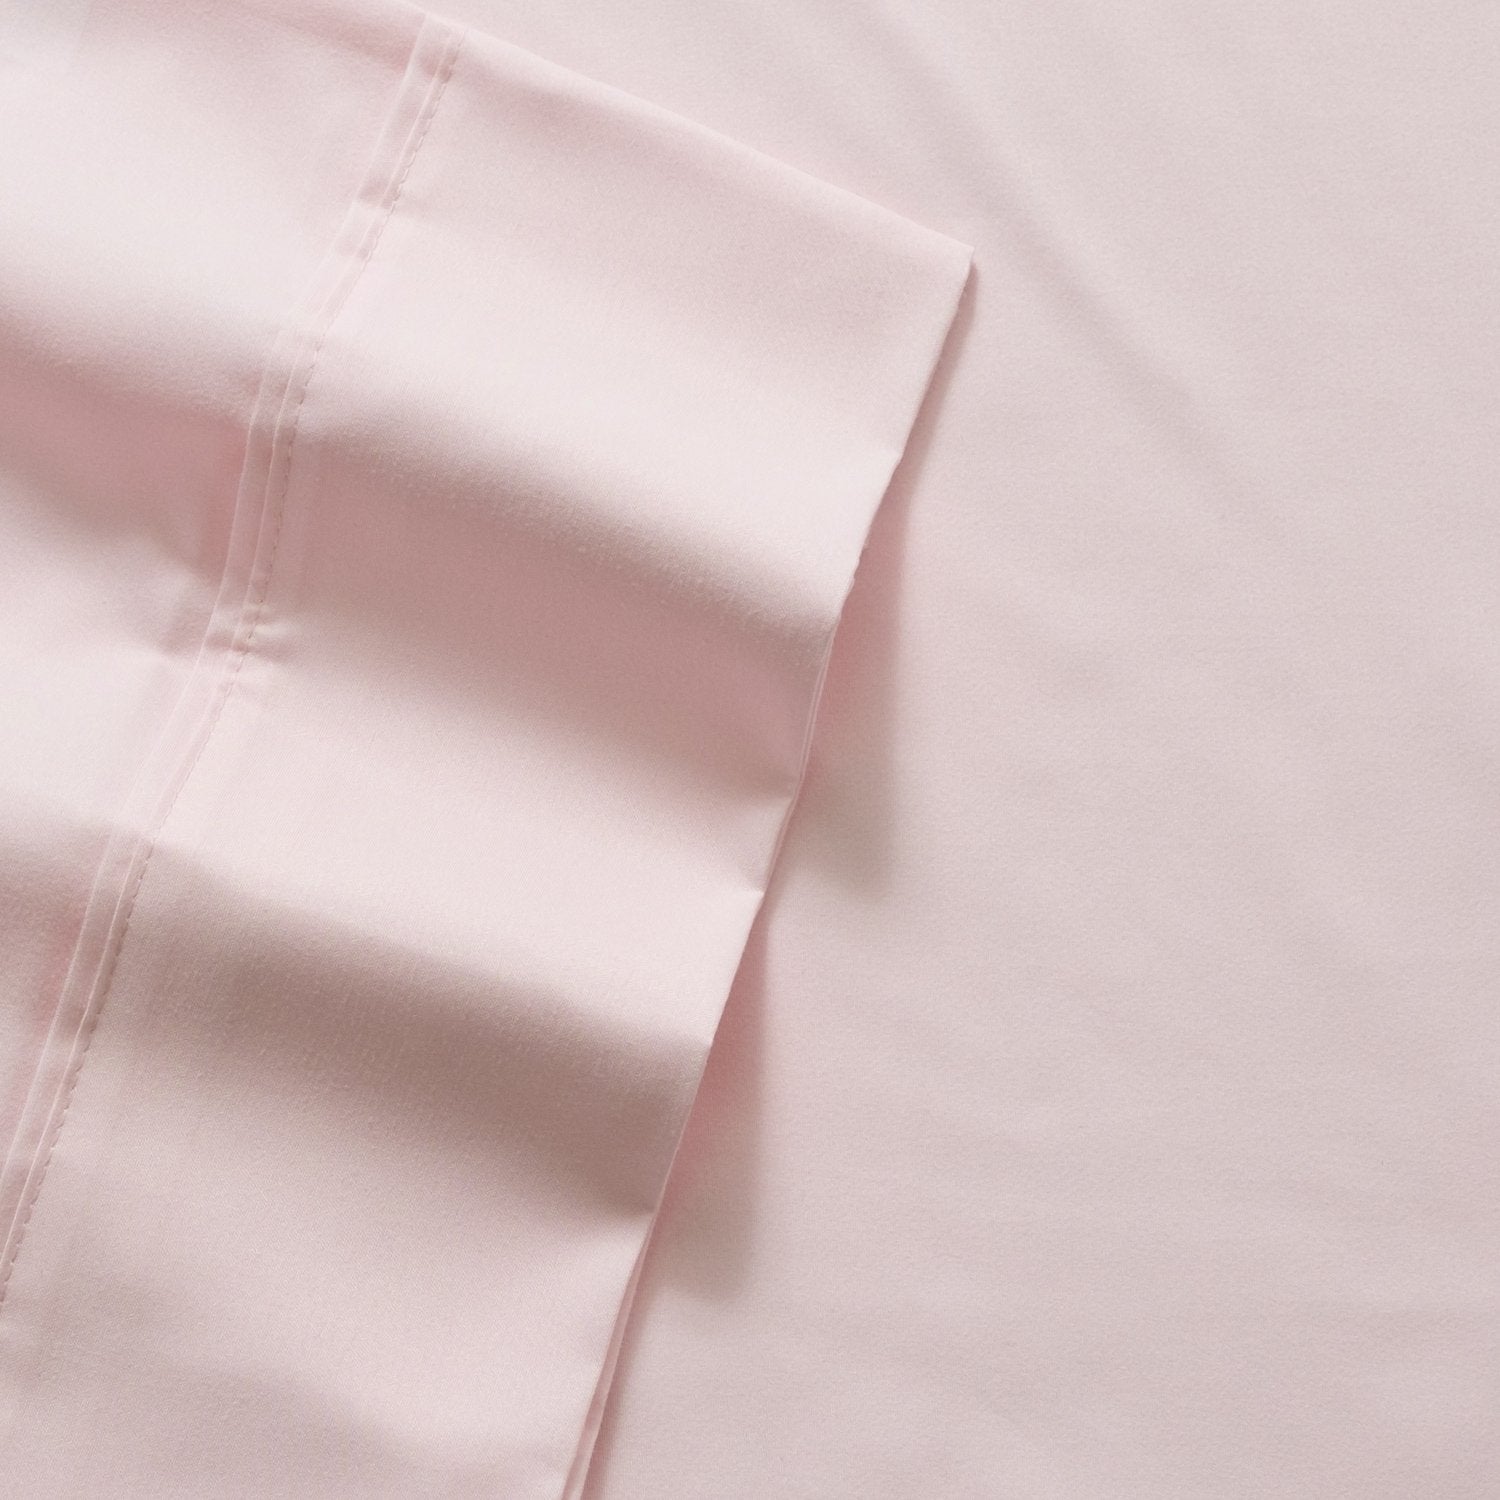 Deluxe 6-Piece Bed Sheet Set (Pale Pink) - Fabric